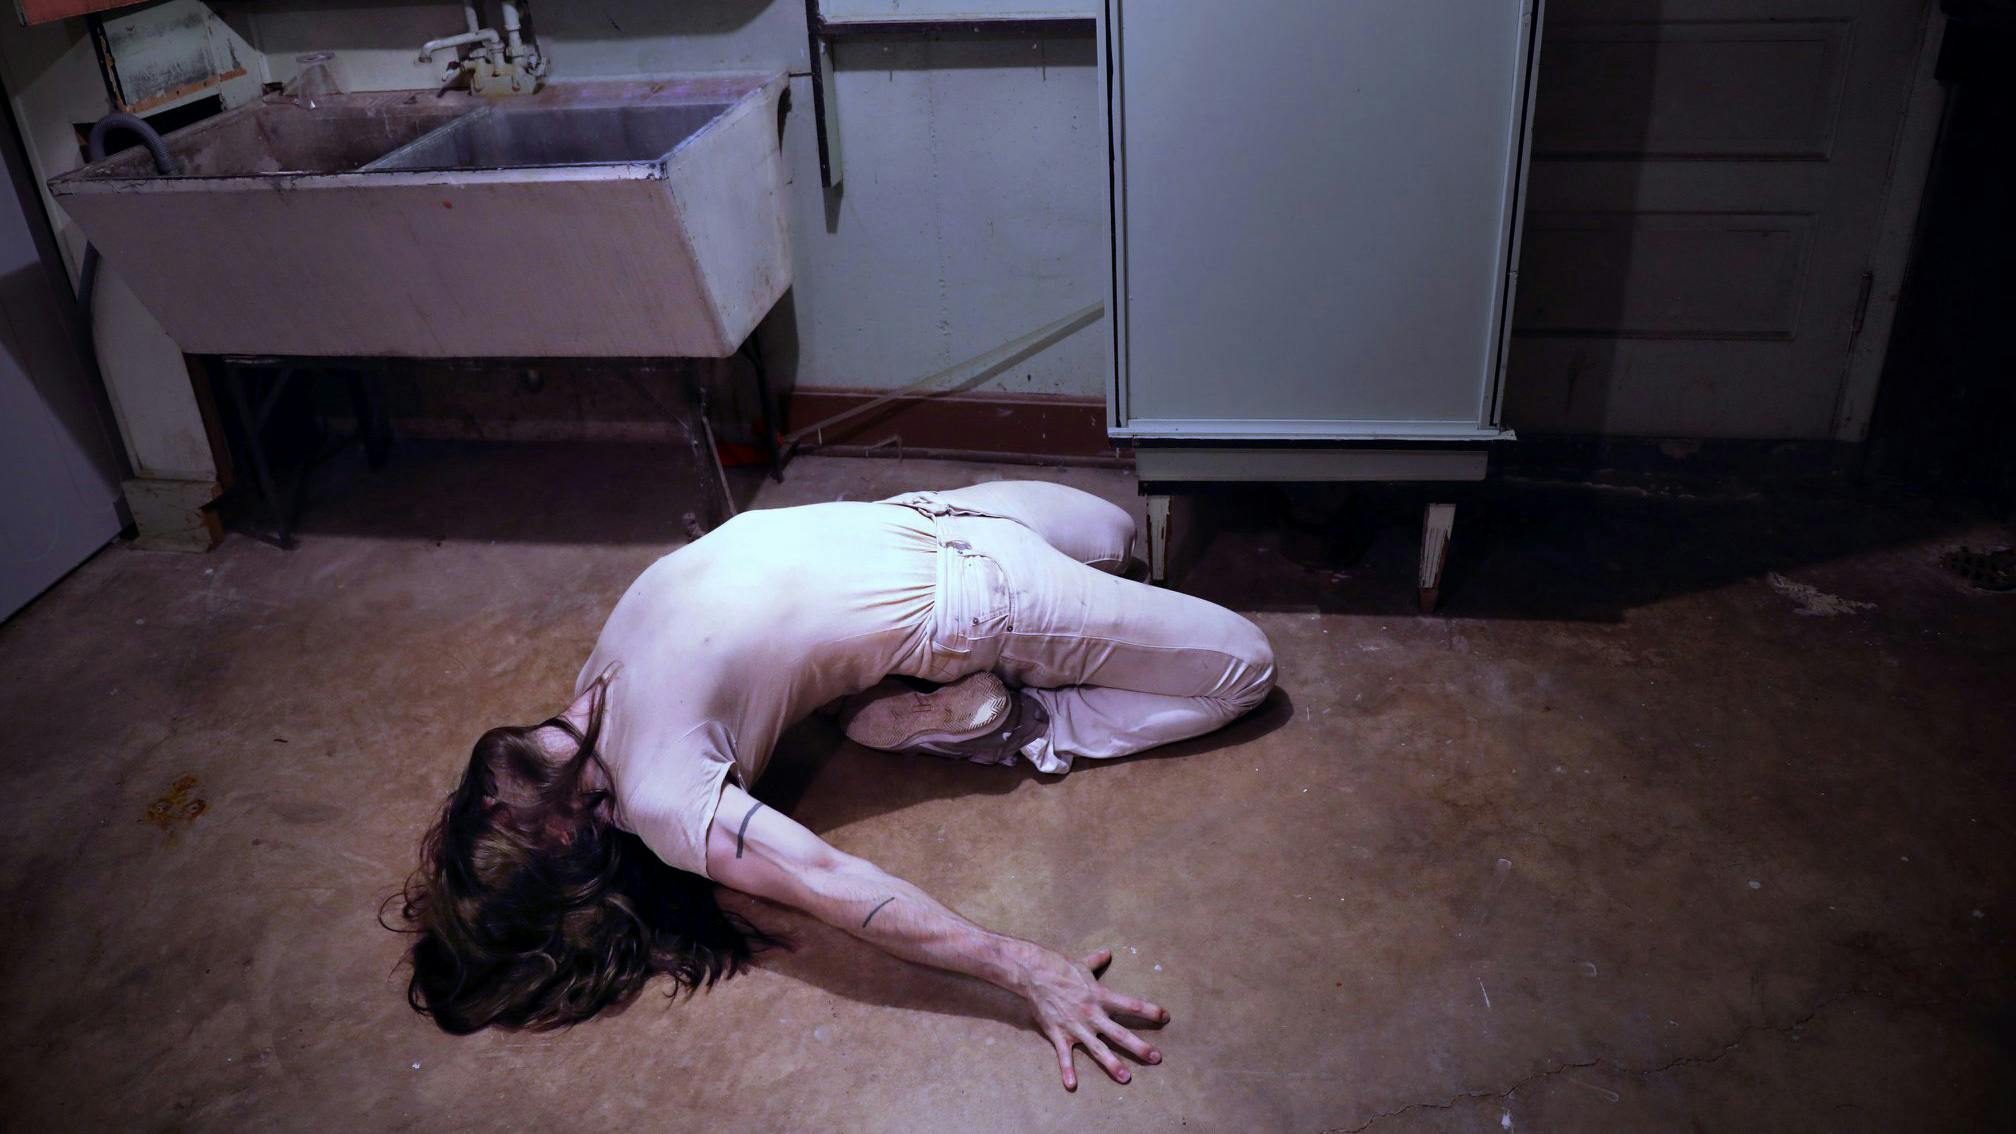 There's New Music From Andrew W.K. Coming Soon